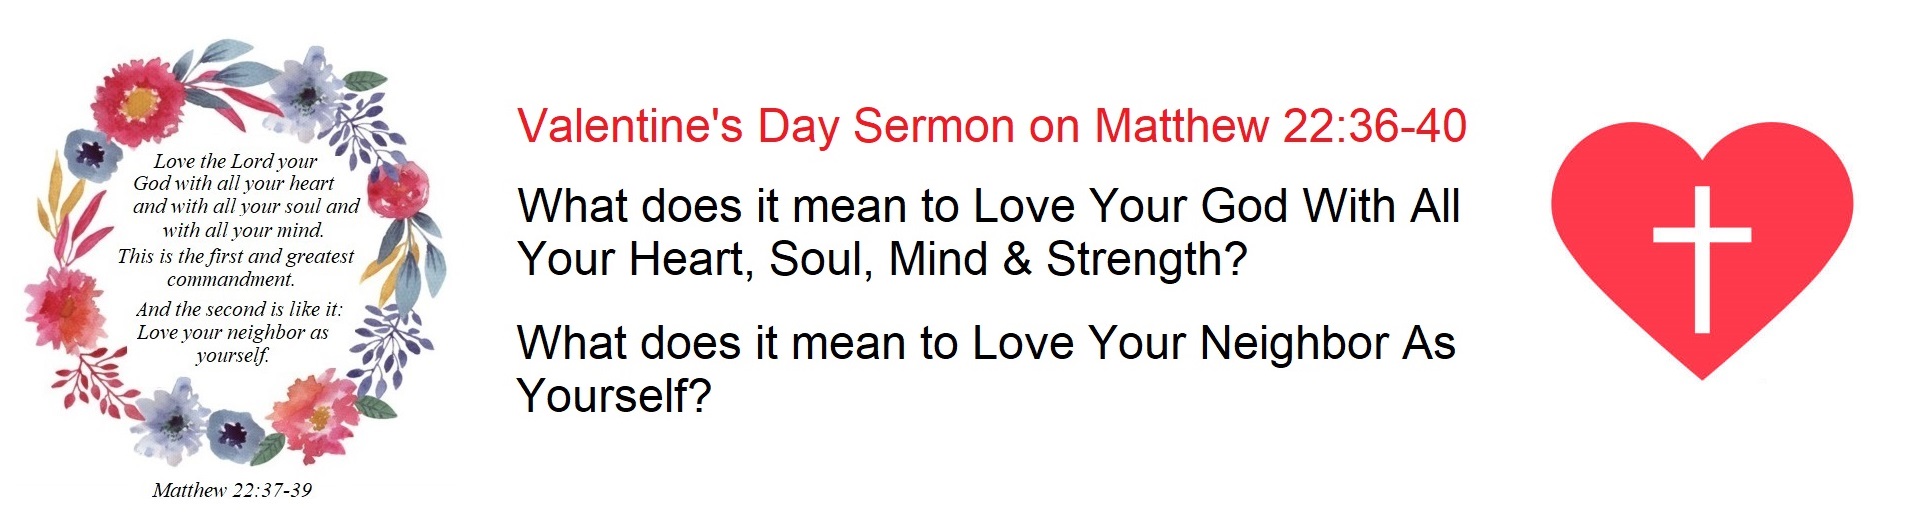 Valentine Day Sermon Matthew 22 37 39 What does it mean to Love Your God With All Your Heart Soul Mind Strength What does it mean to Love Your Neighbor As Yourself banner